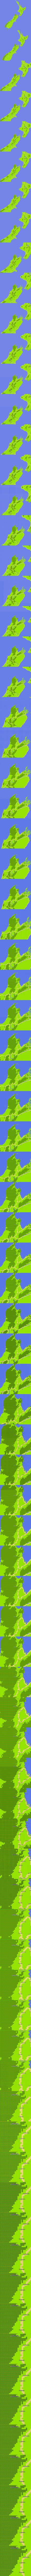 Pixel World Maps collection image